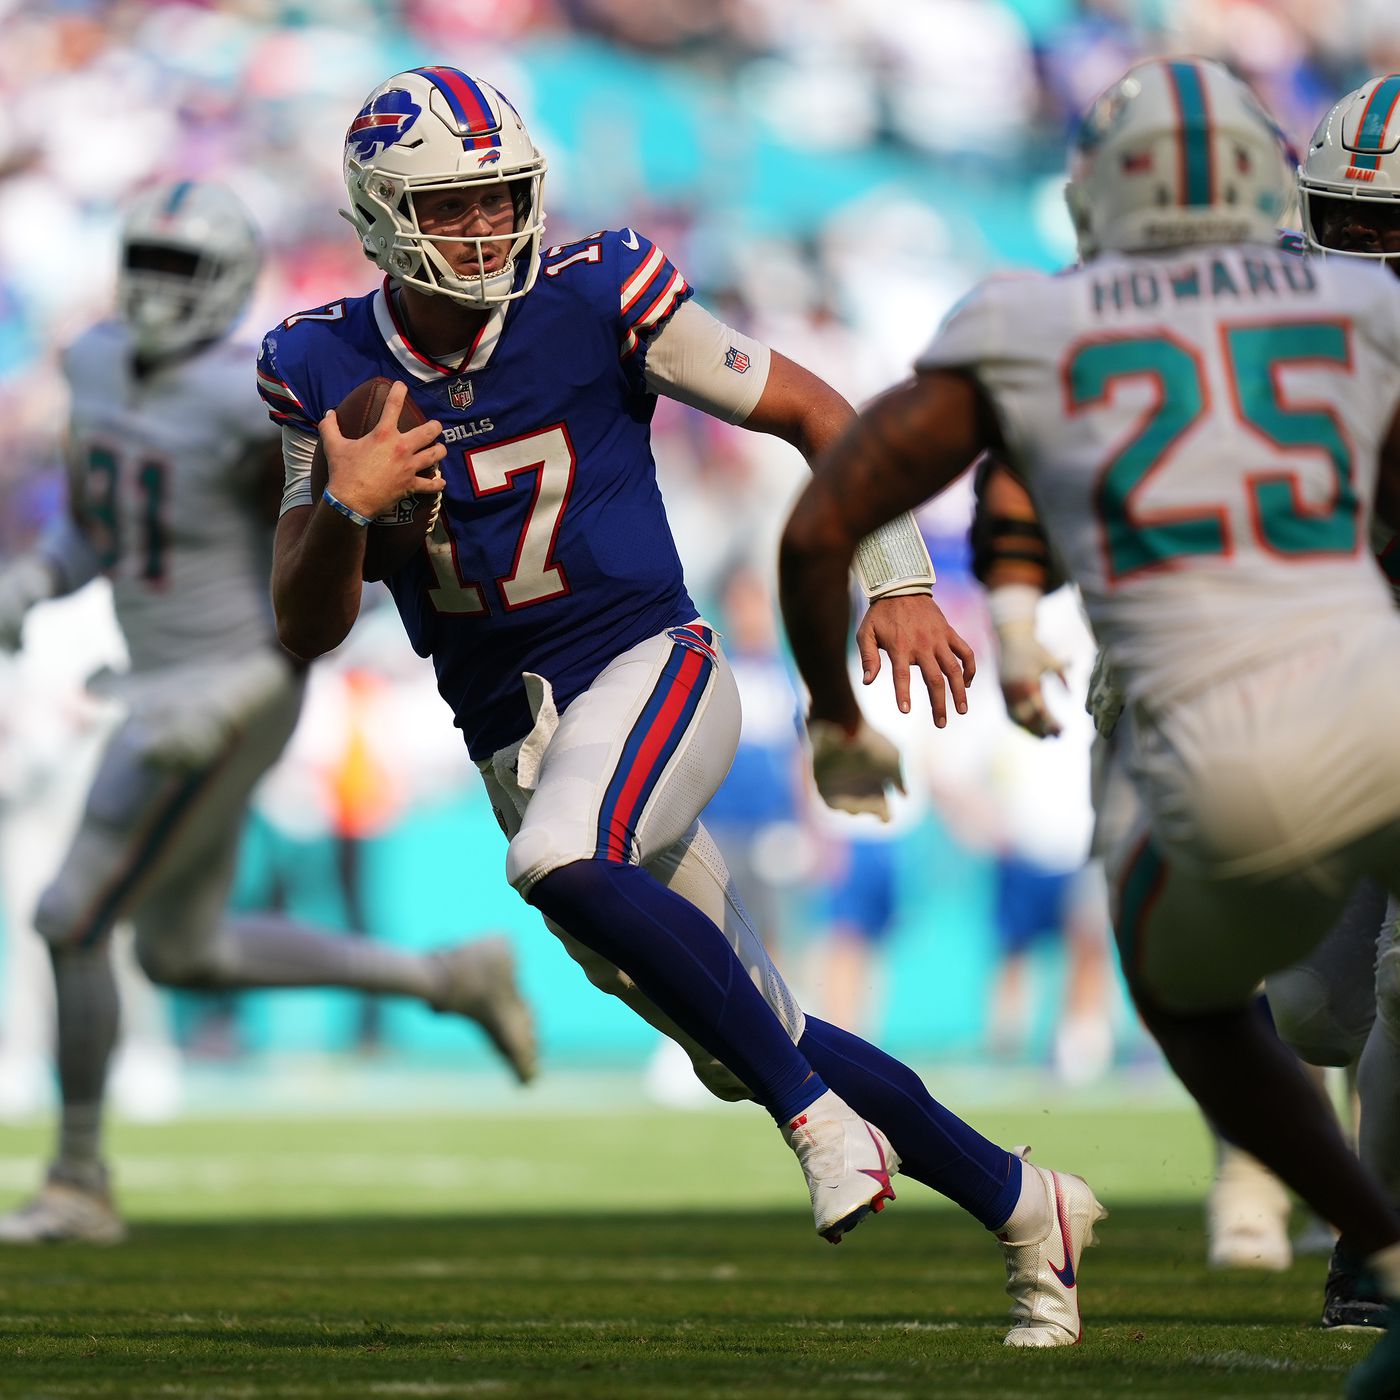 How to watch Buffalo Bills vs Miami Dolphins: NFL Week 15 time, TV